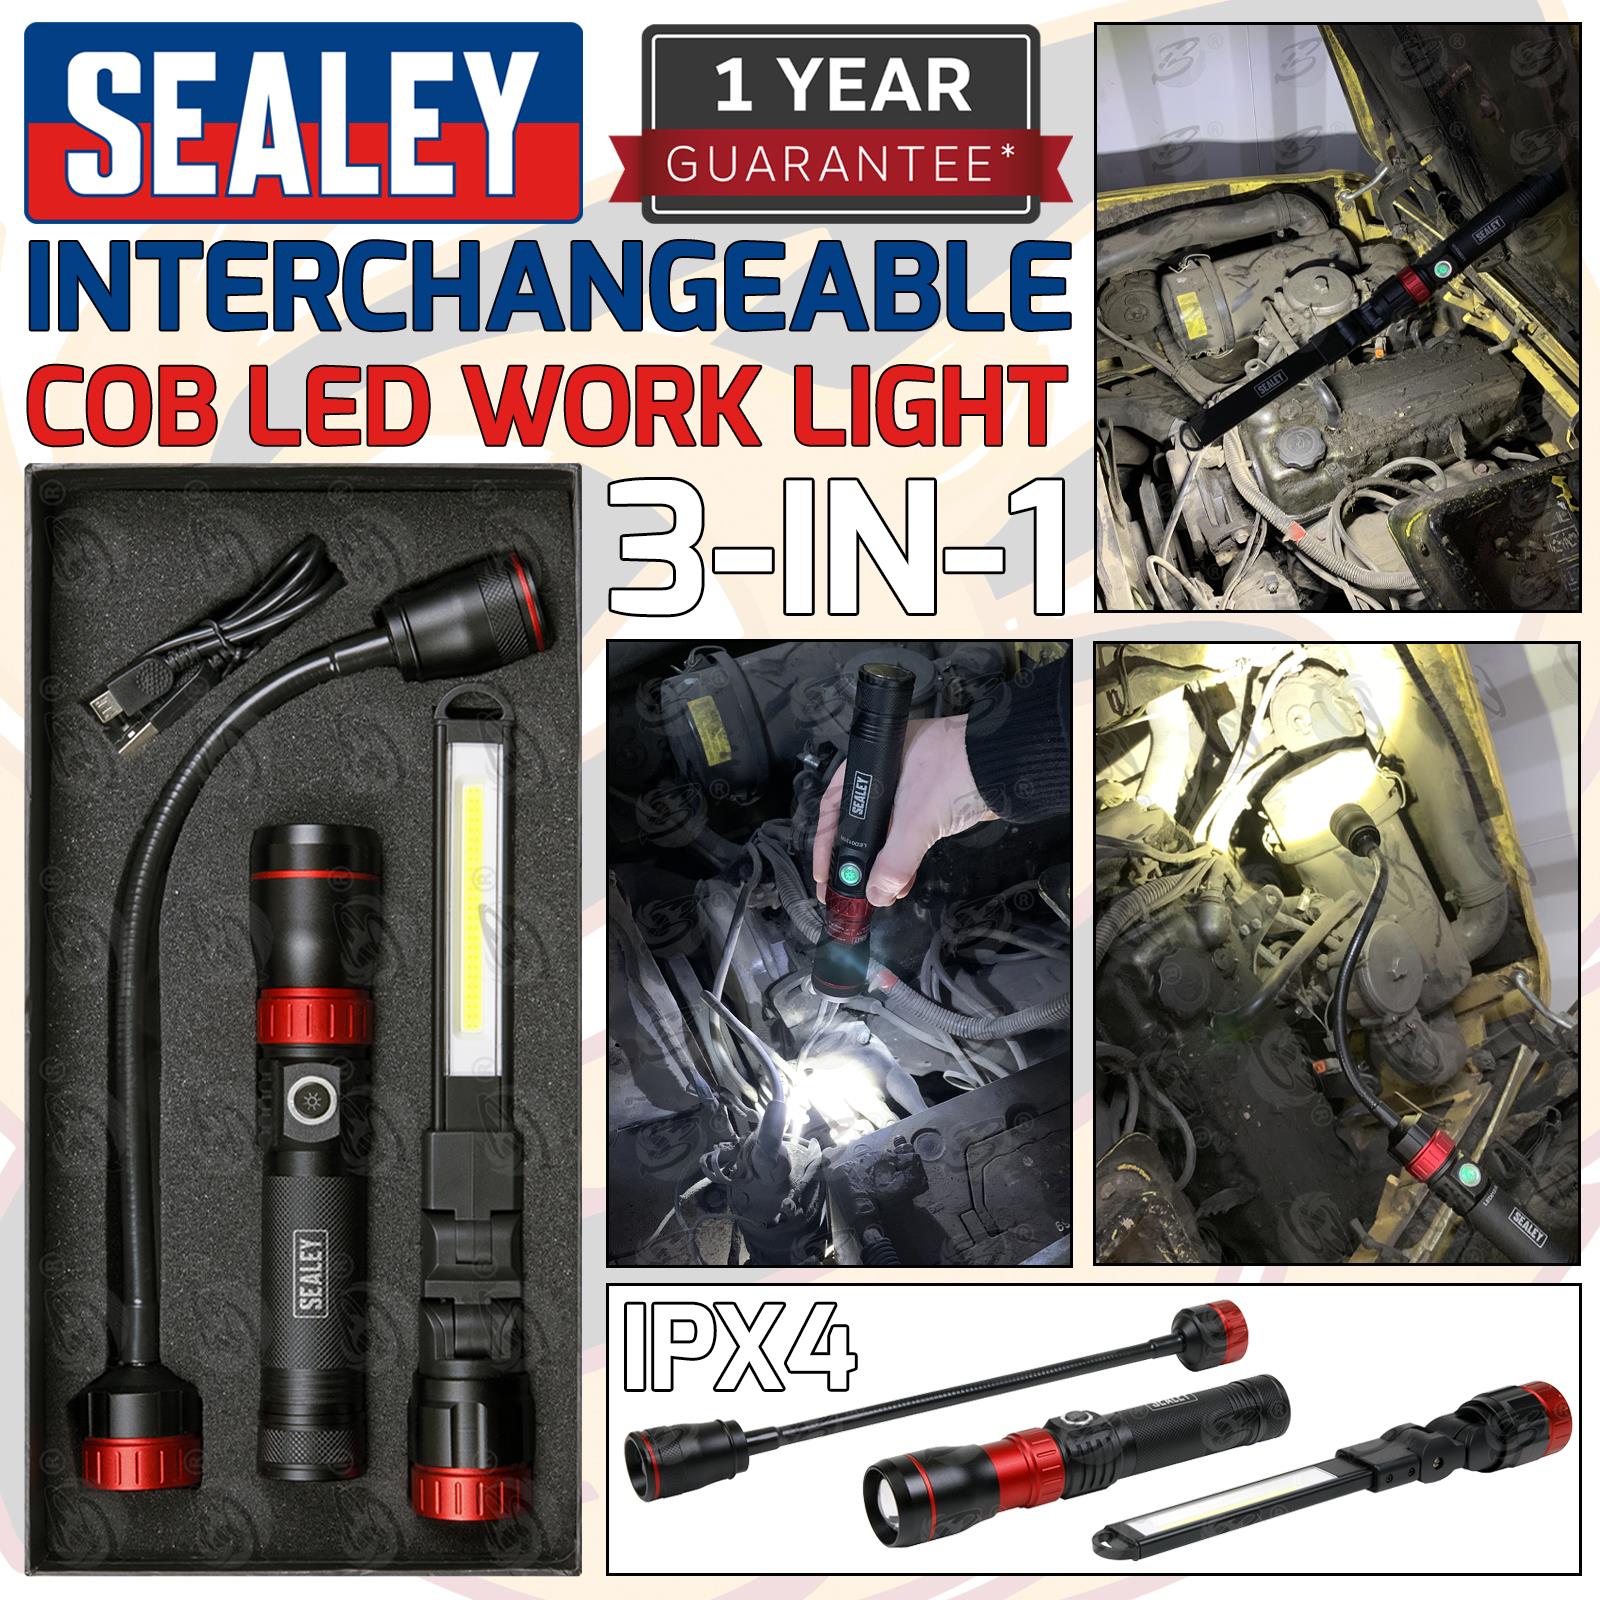 SEALEY RECHARGEABLE COB LED INTERCHANGEABLE WORK LIGHT